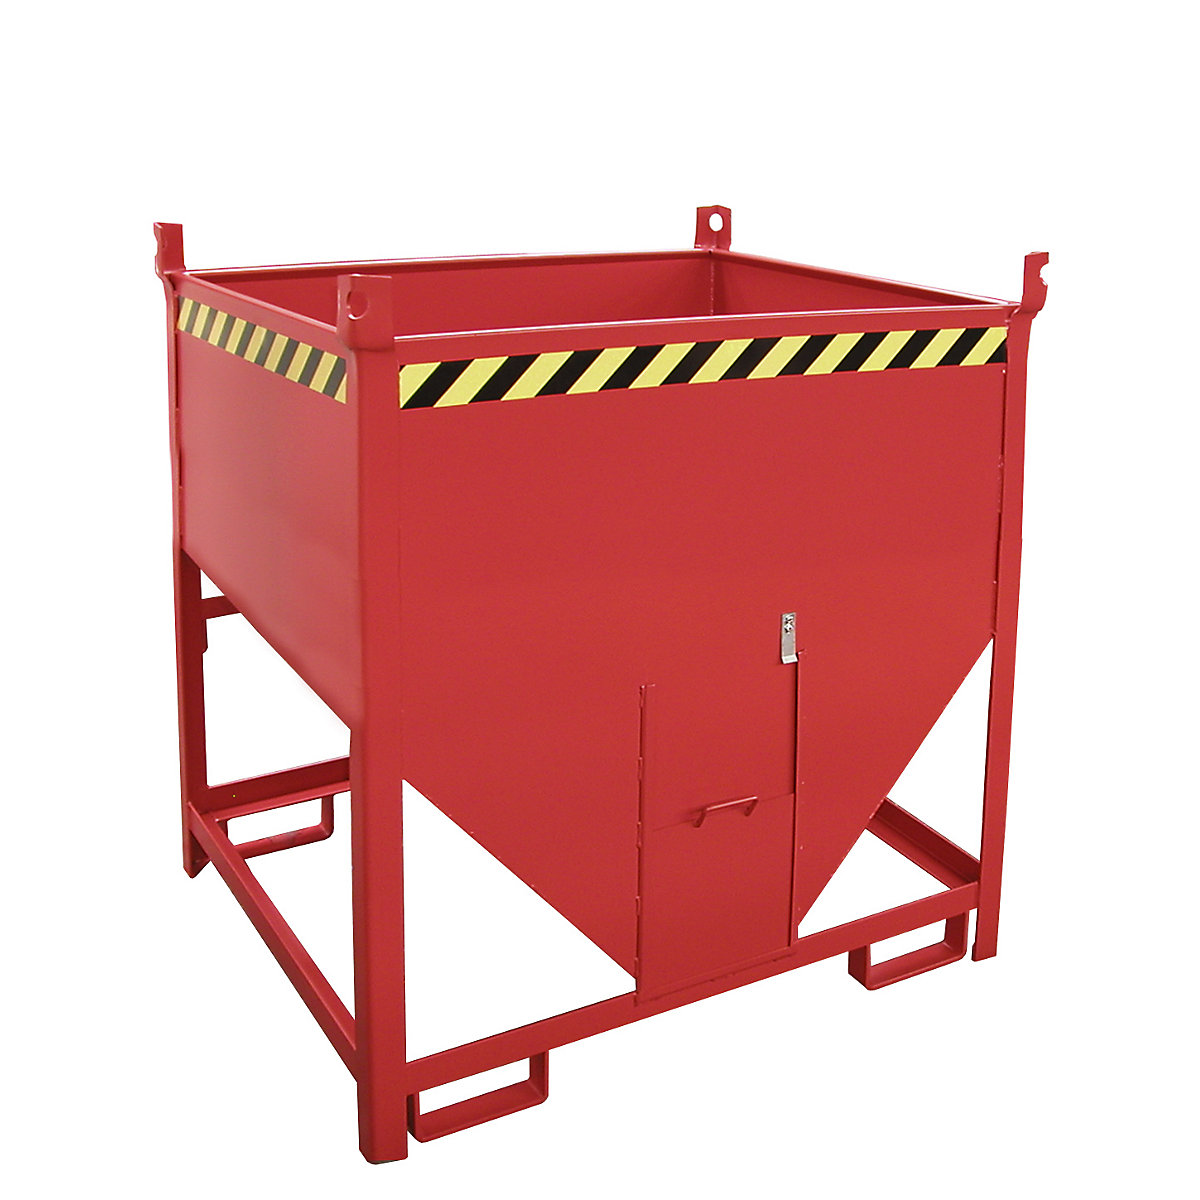 Silo container – eurokraft pro, capacity 0.75 m³, sliding trap on front side, flame red RAL 3000-3